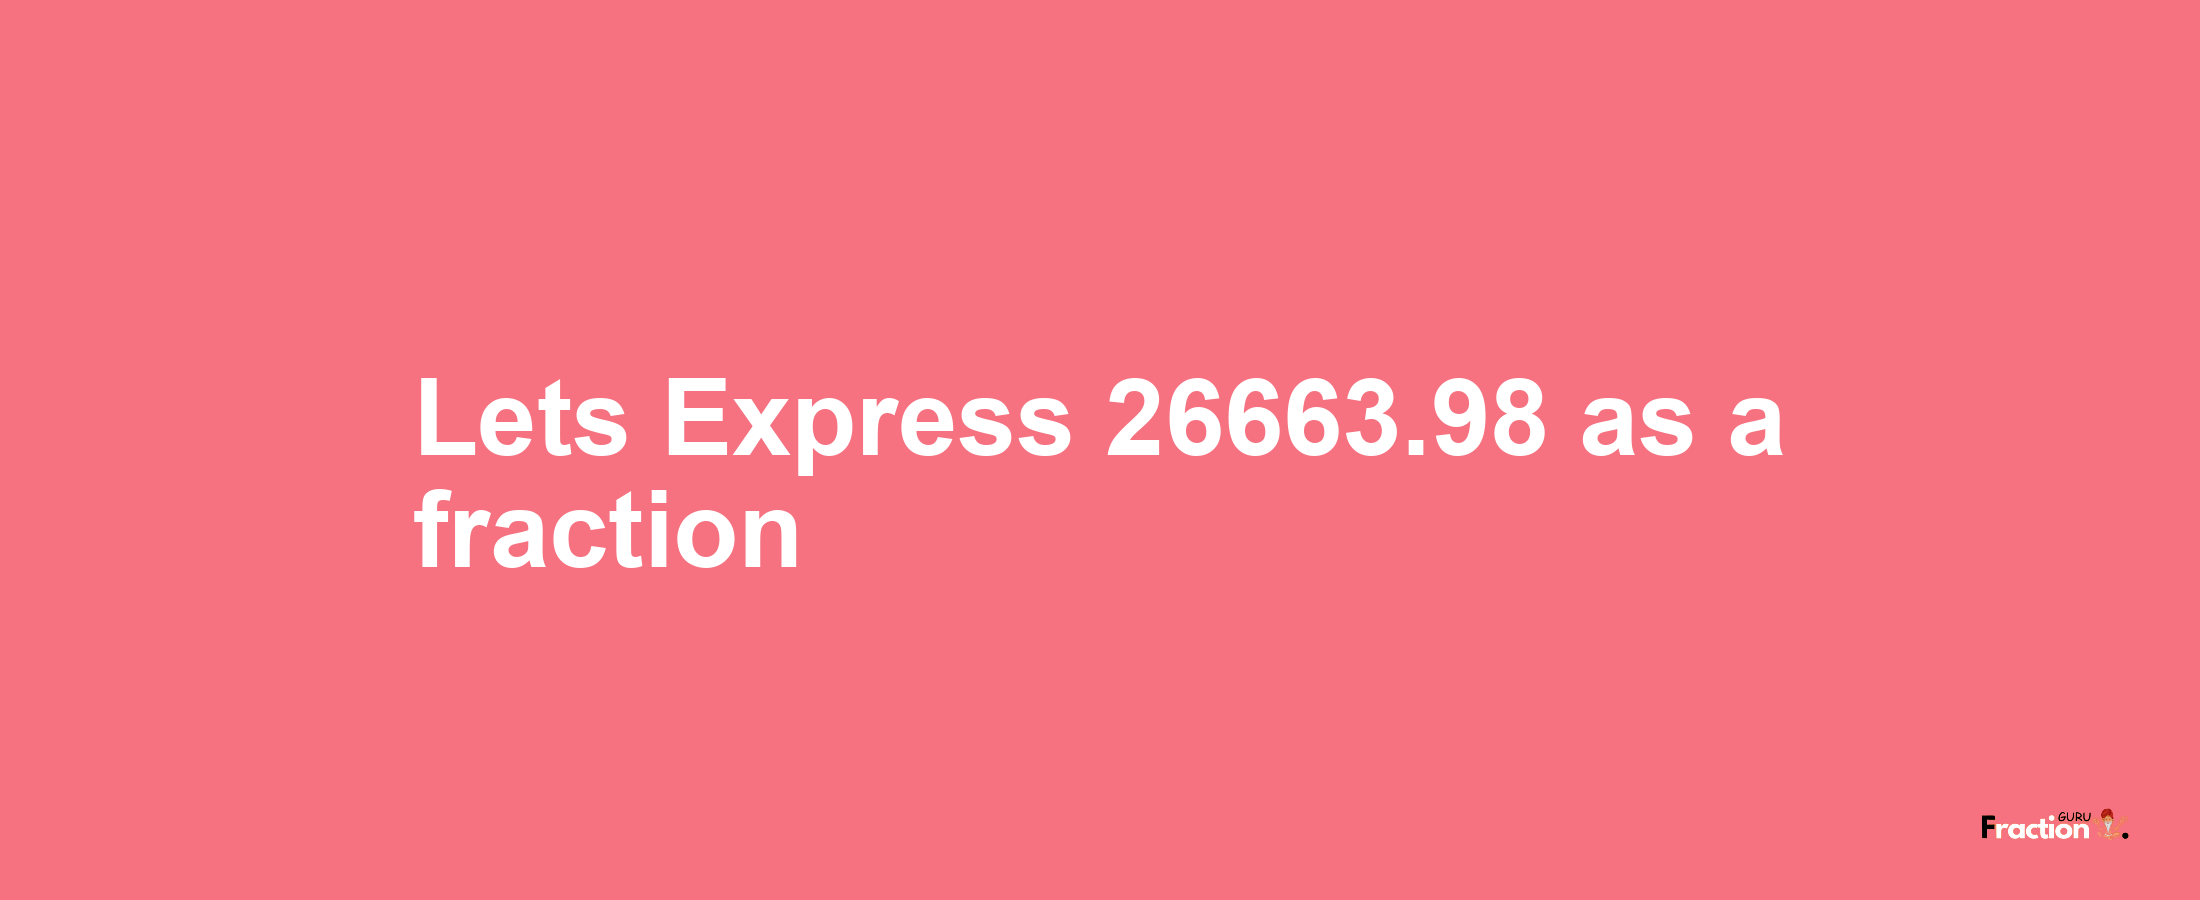 Lets Express 26663.98 as afraction